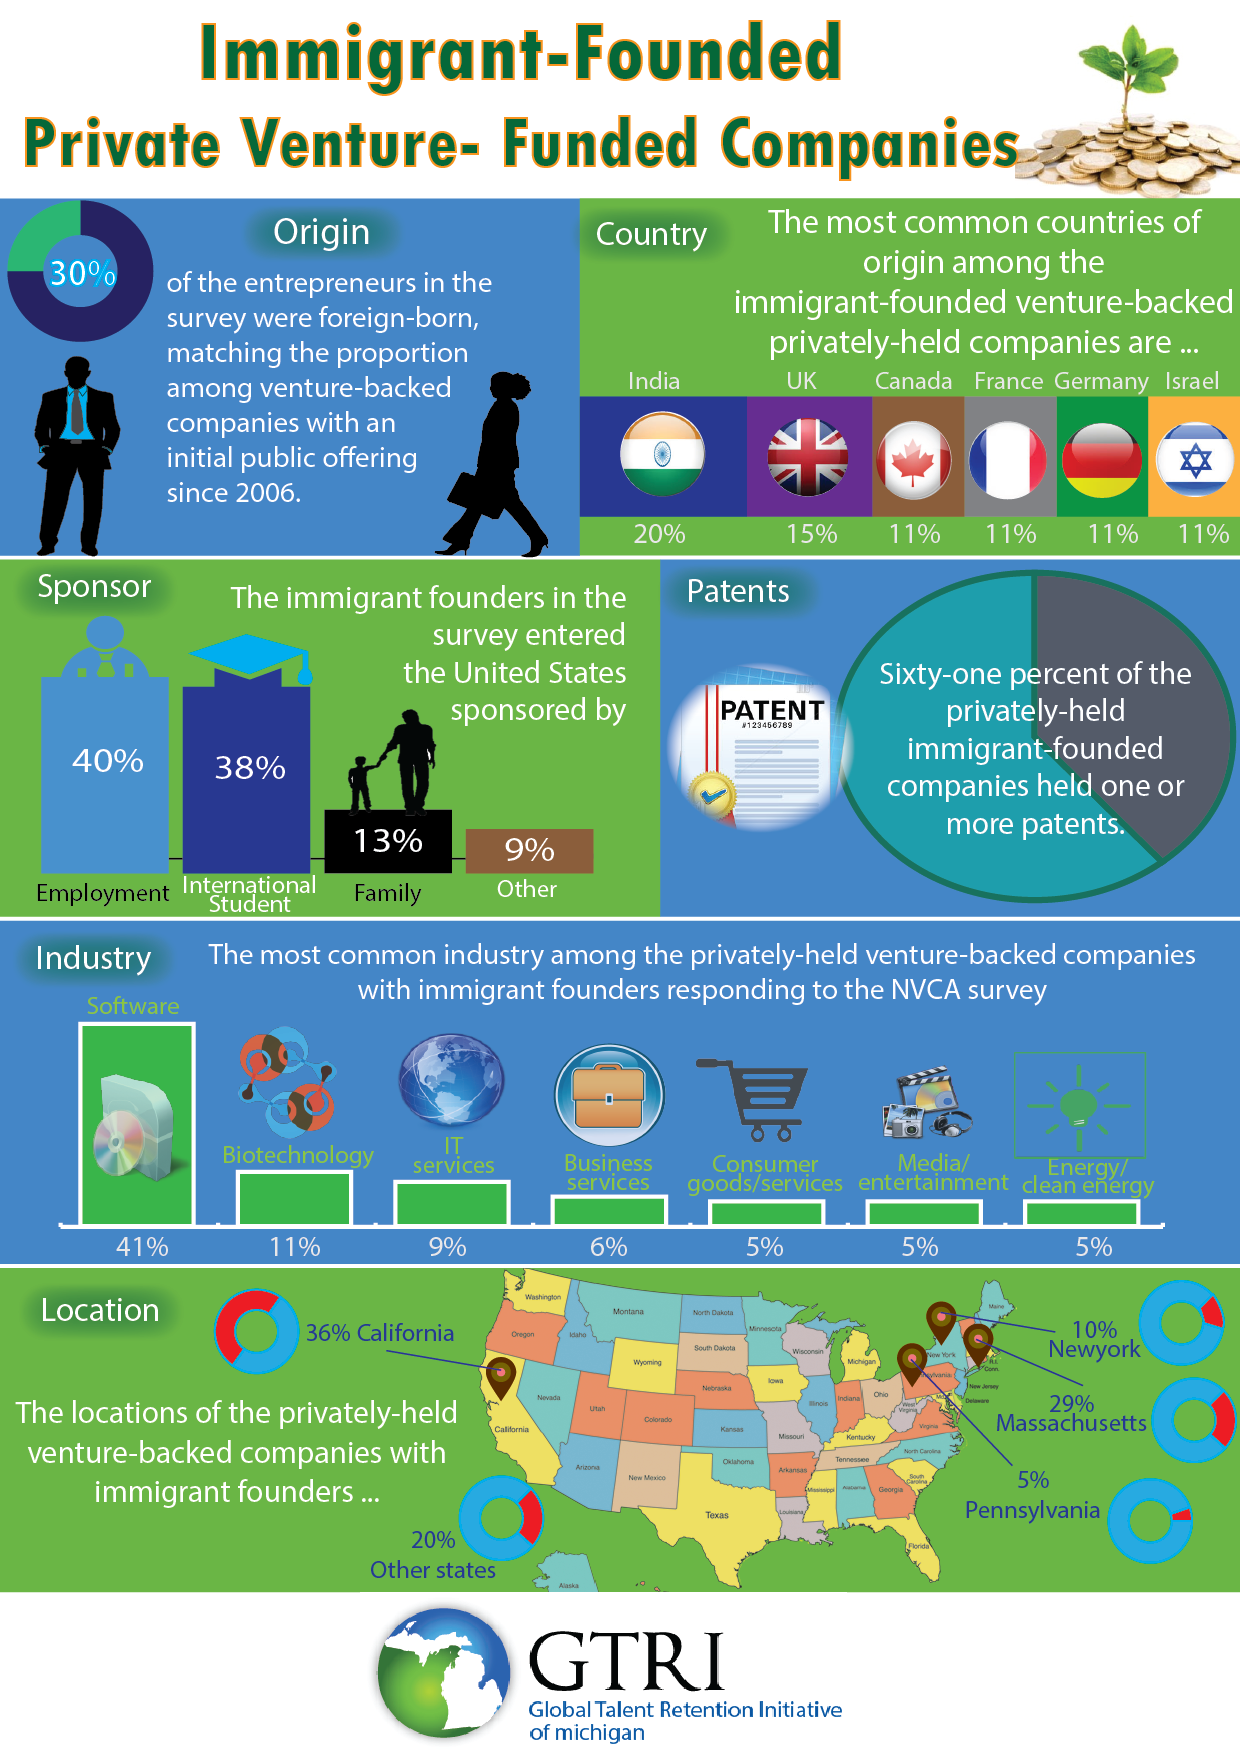 Awesome Facts About the Word Awesome Infographic | Awesome Facts, Awesome Facts Infographic ...